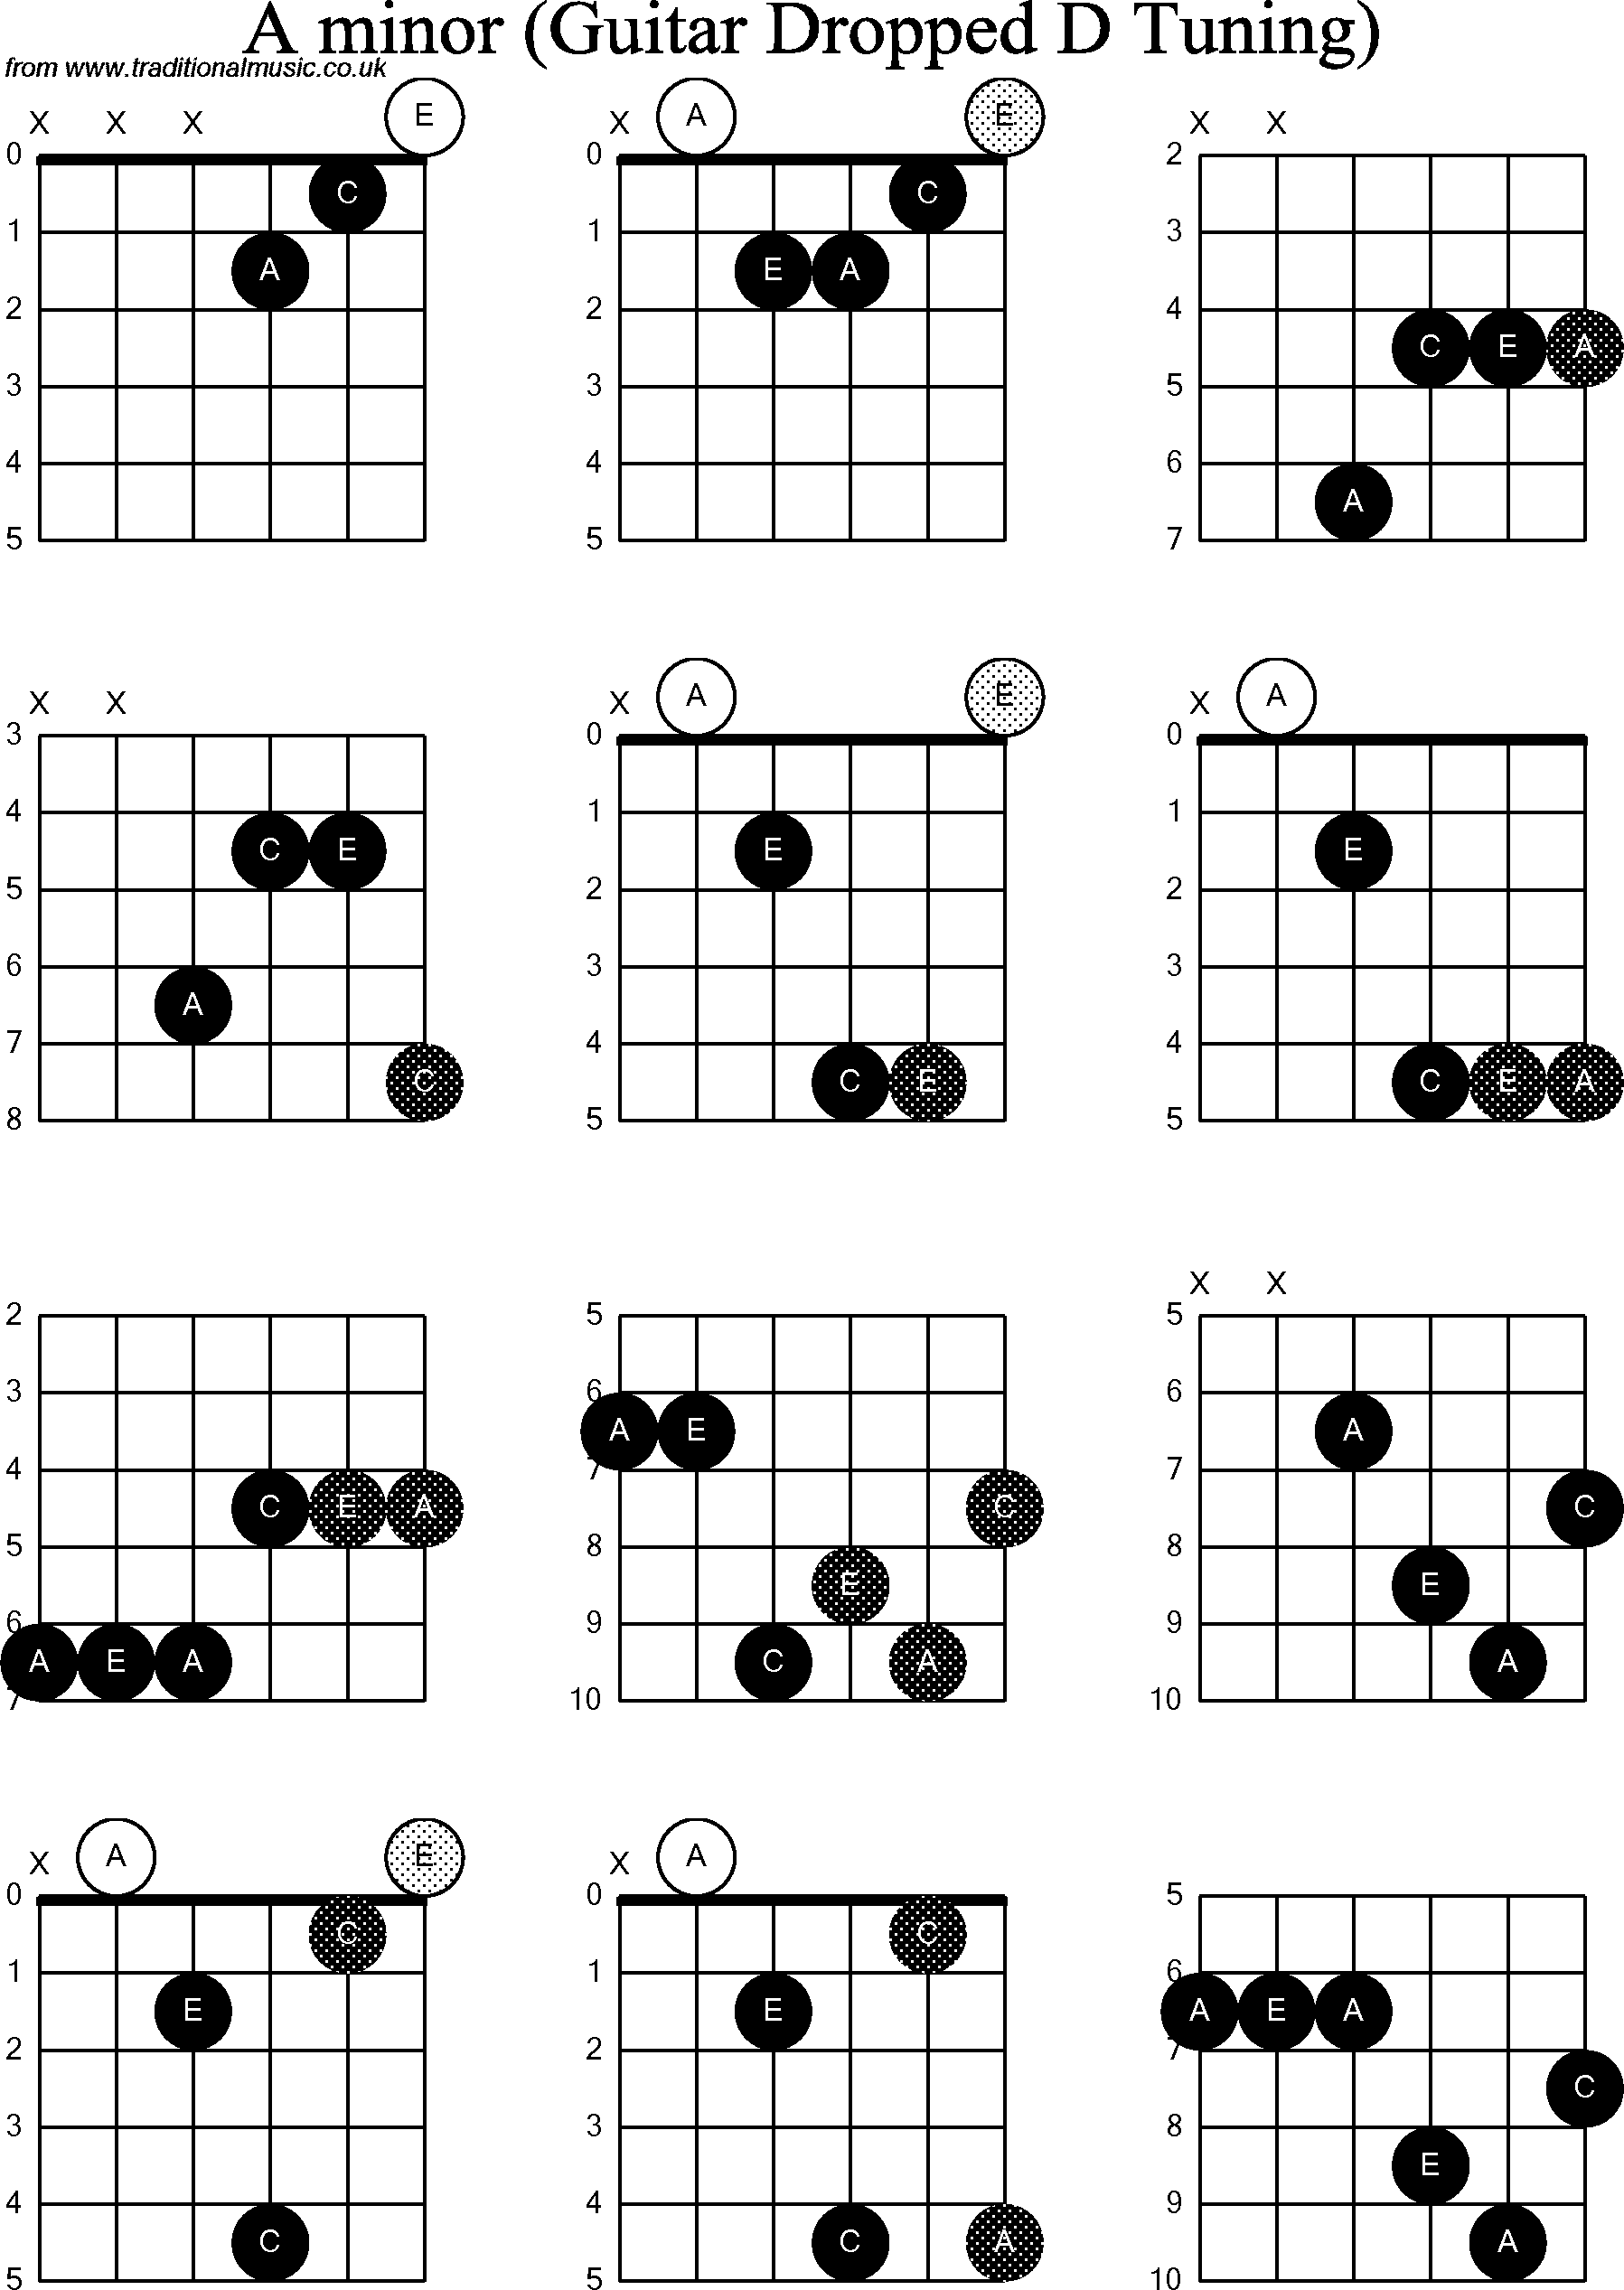 Chord Diagrams For Dropped D Guitar DADGBE A Minor